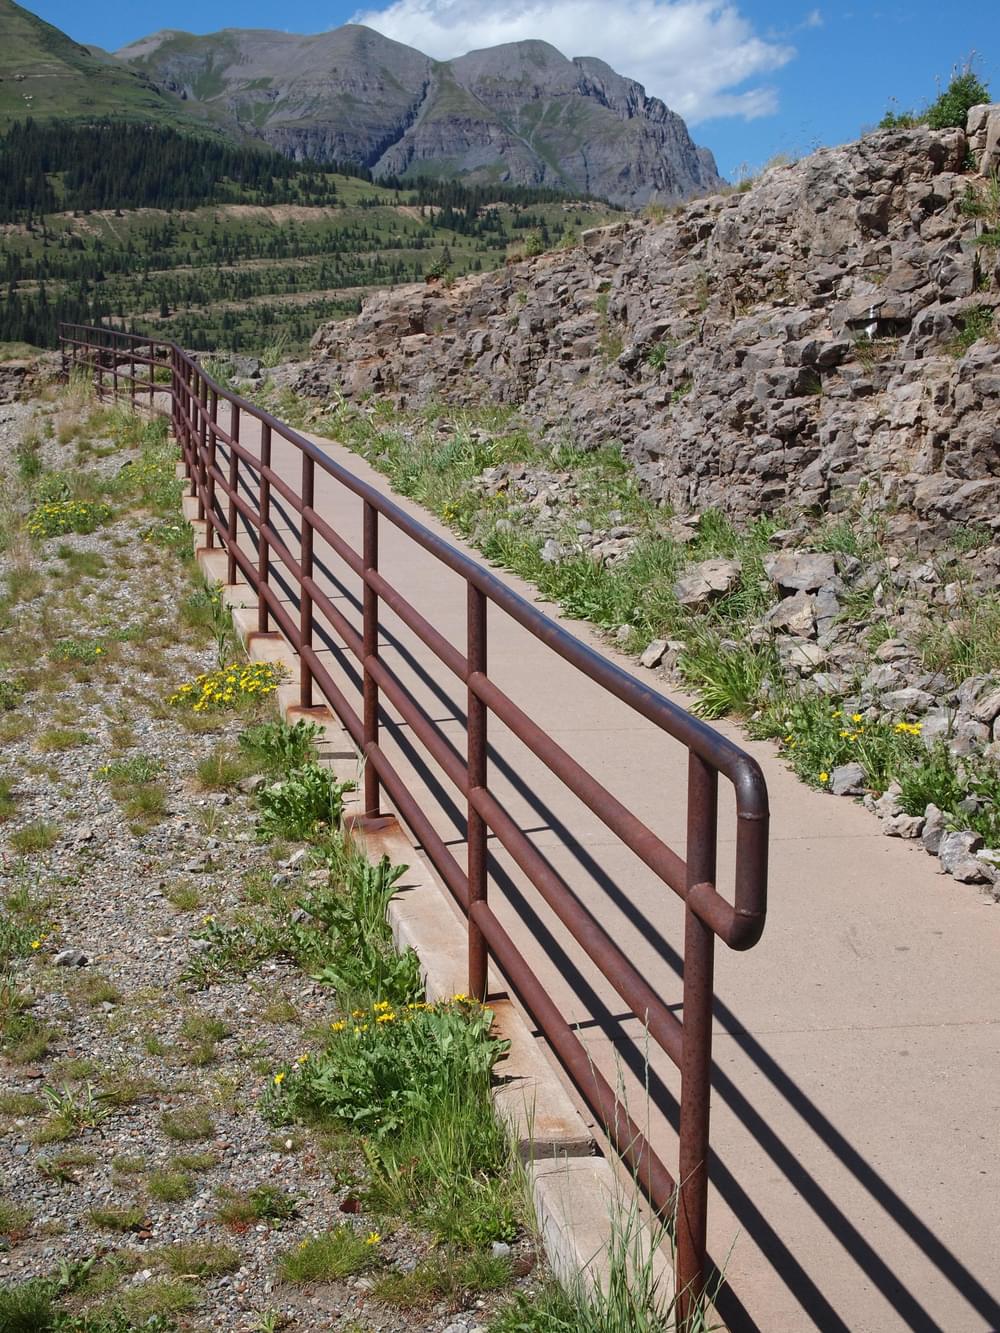 Trail to overlook at Molas Pass on the Colorado Trail; note handrail only along slope above parking lot